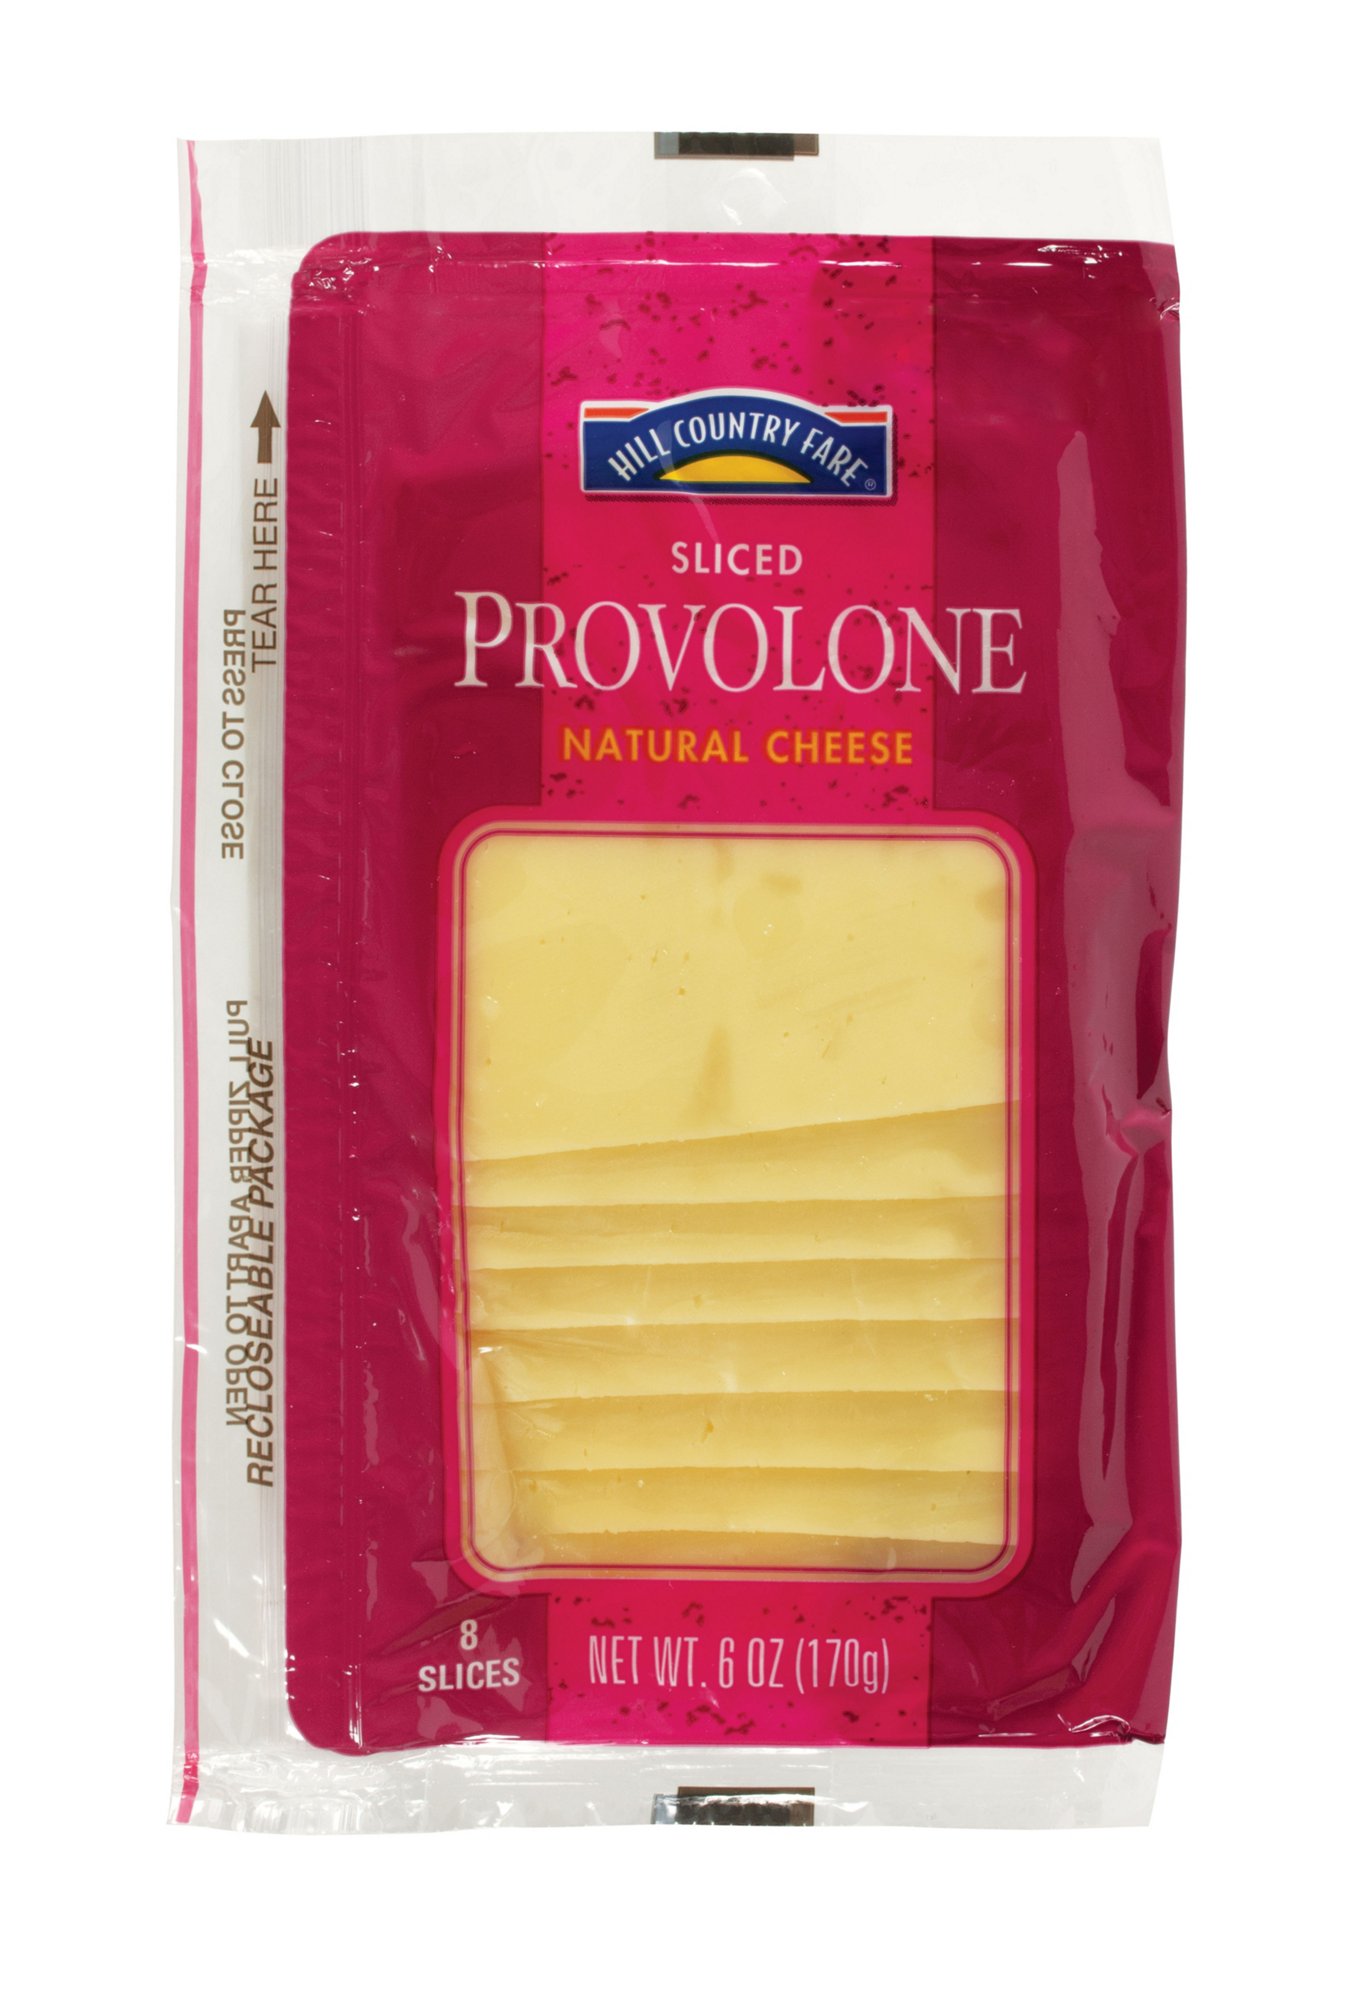 Hill Country Fare Sliced Provolone Cheese - Shop Sliced Cheese at HEB